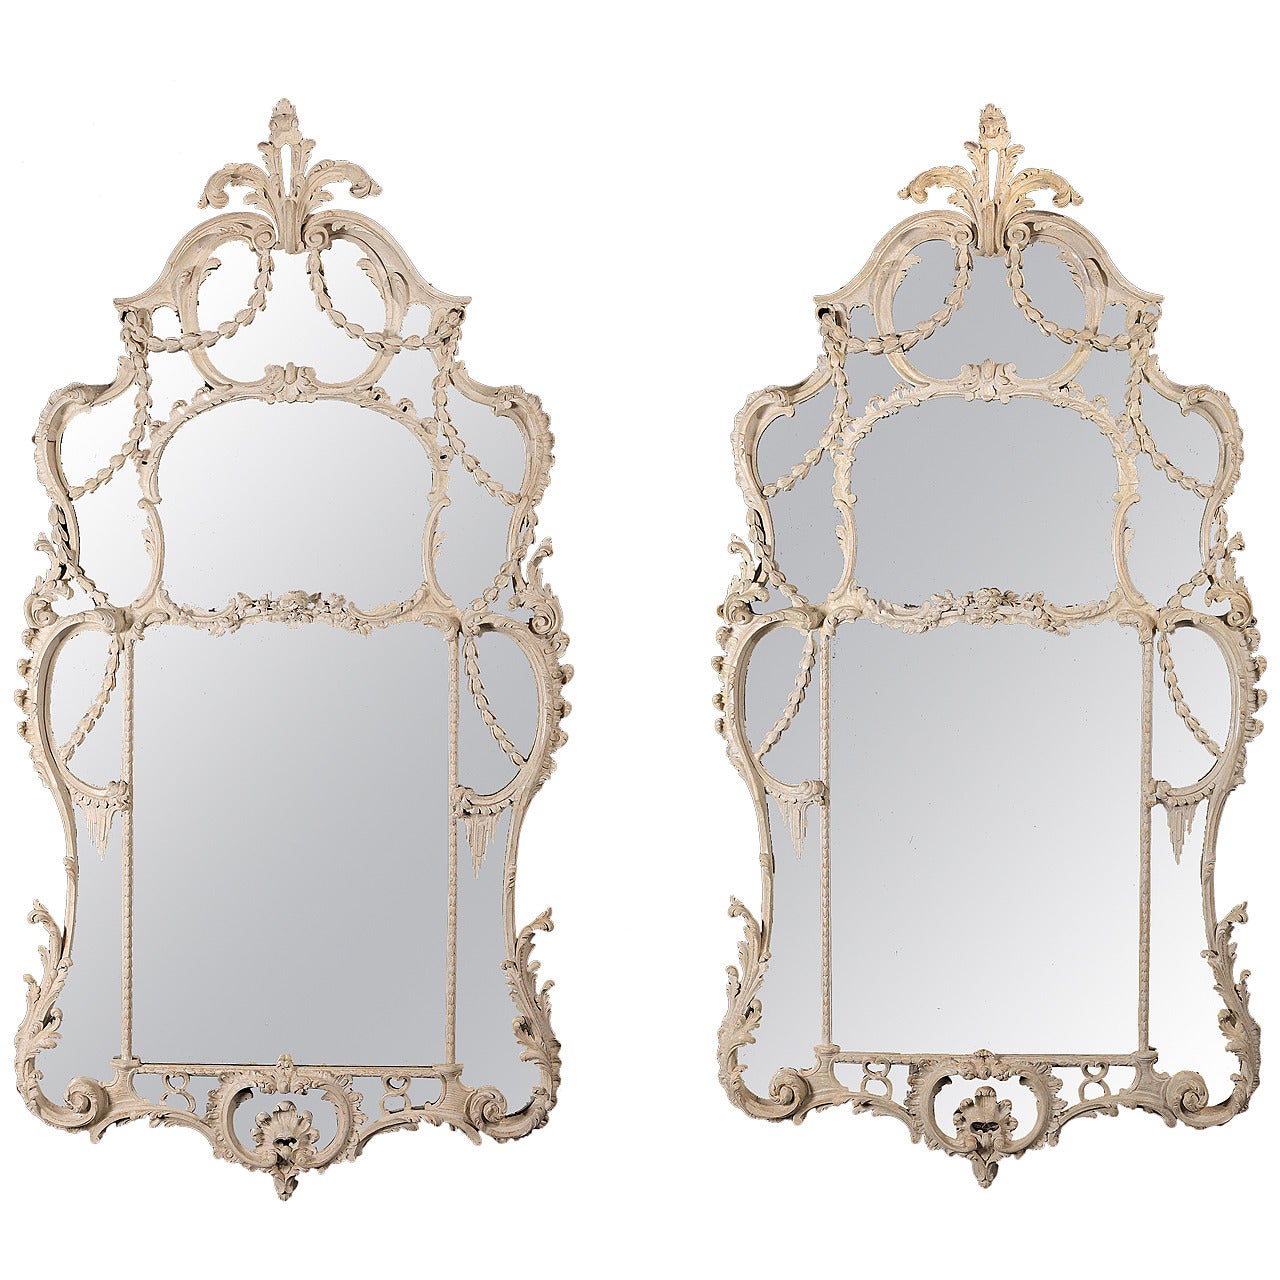 Superb Pair of George II Mirrors in the Manner of John Linnell For Sale